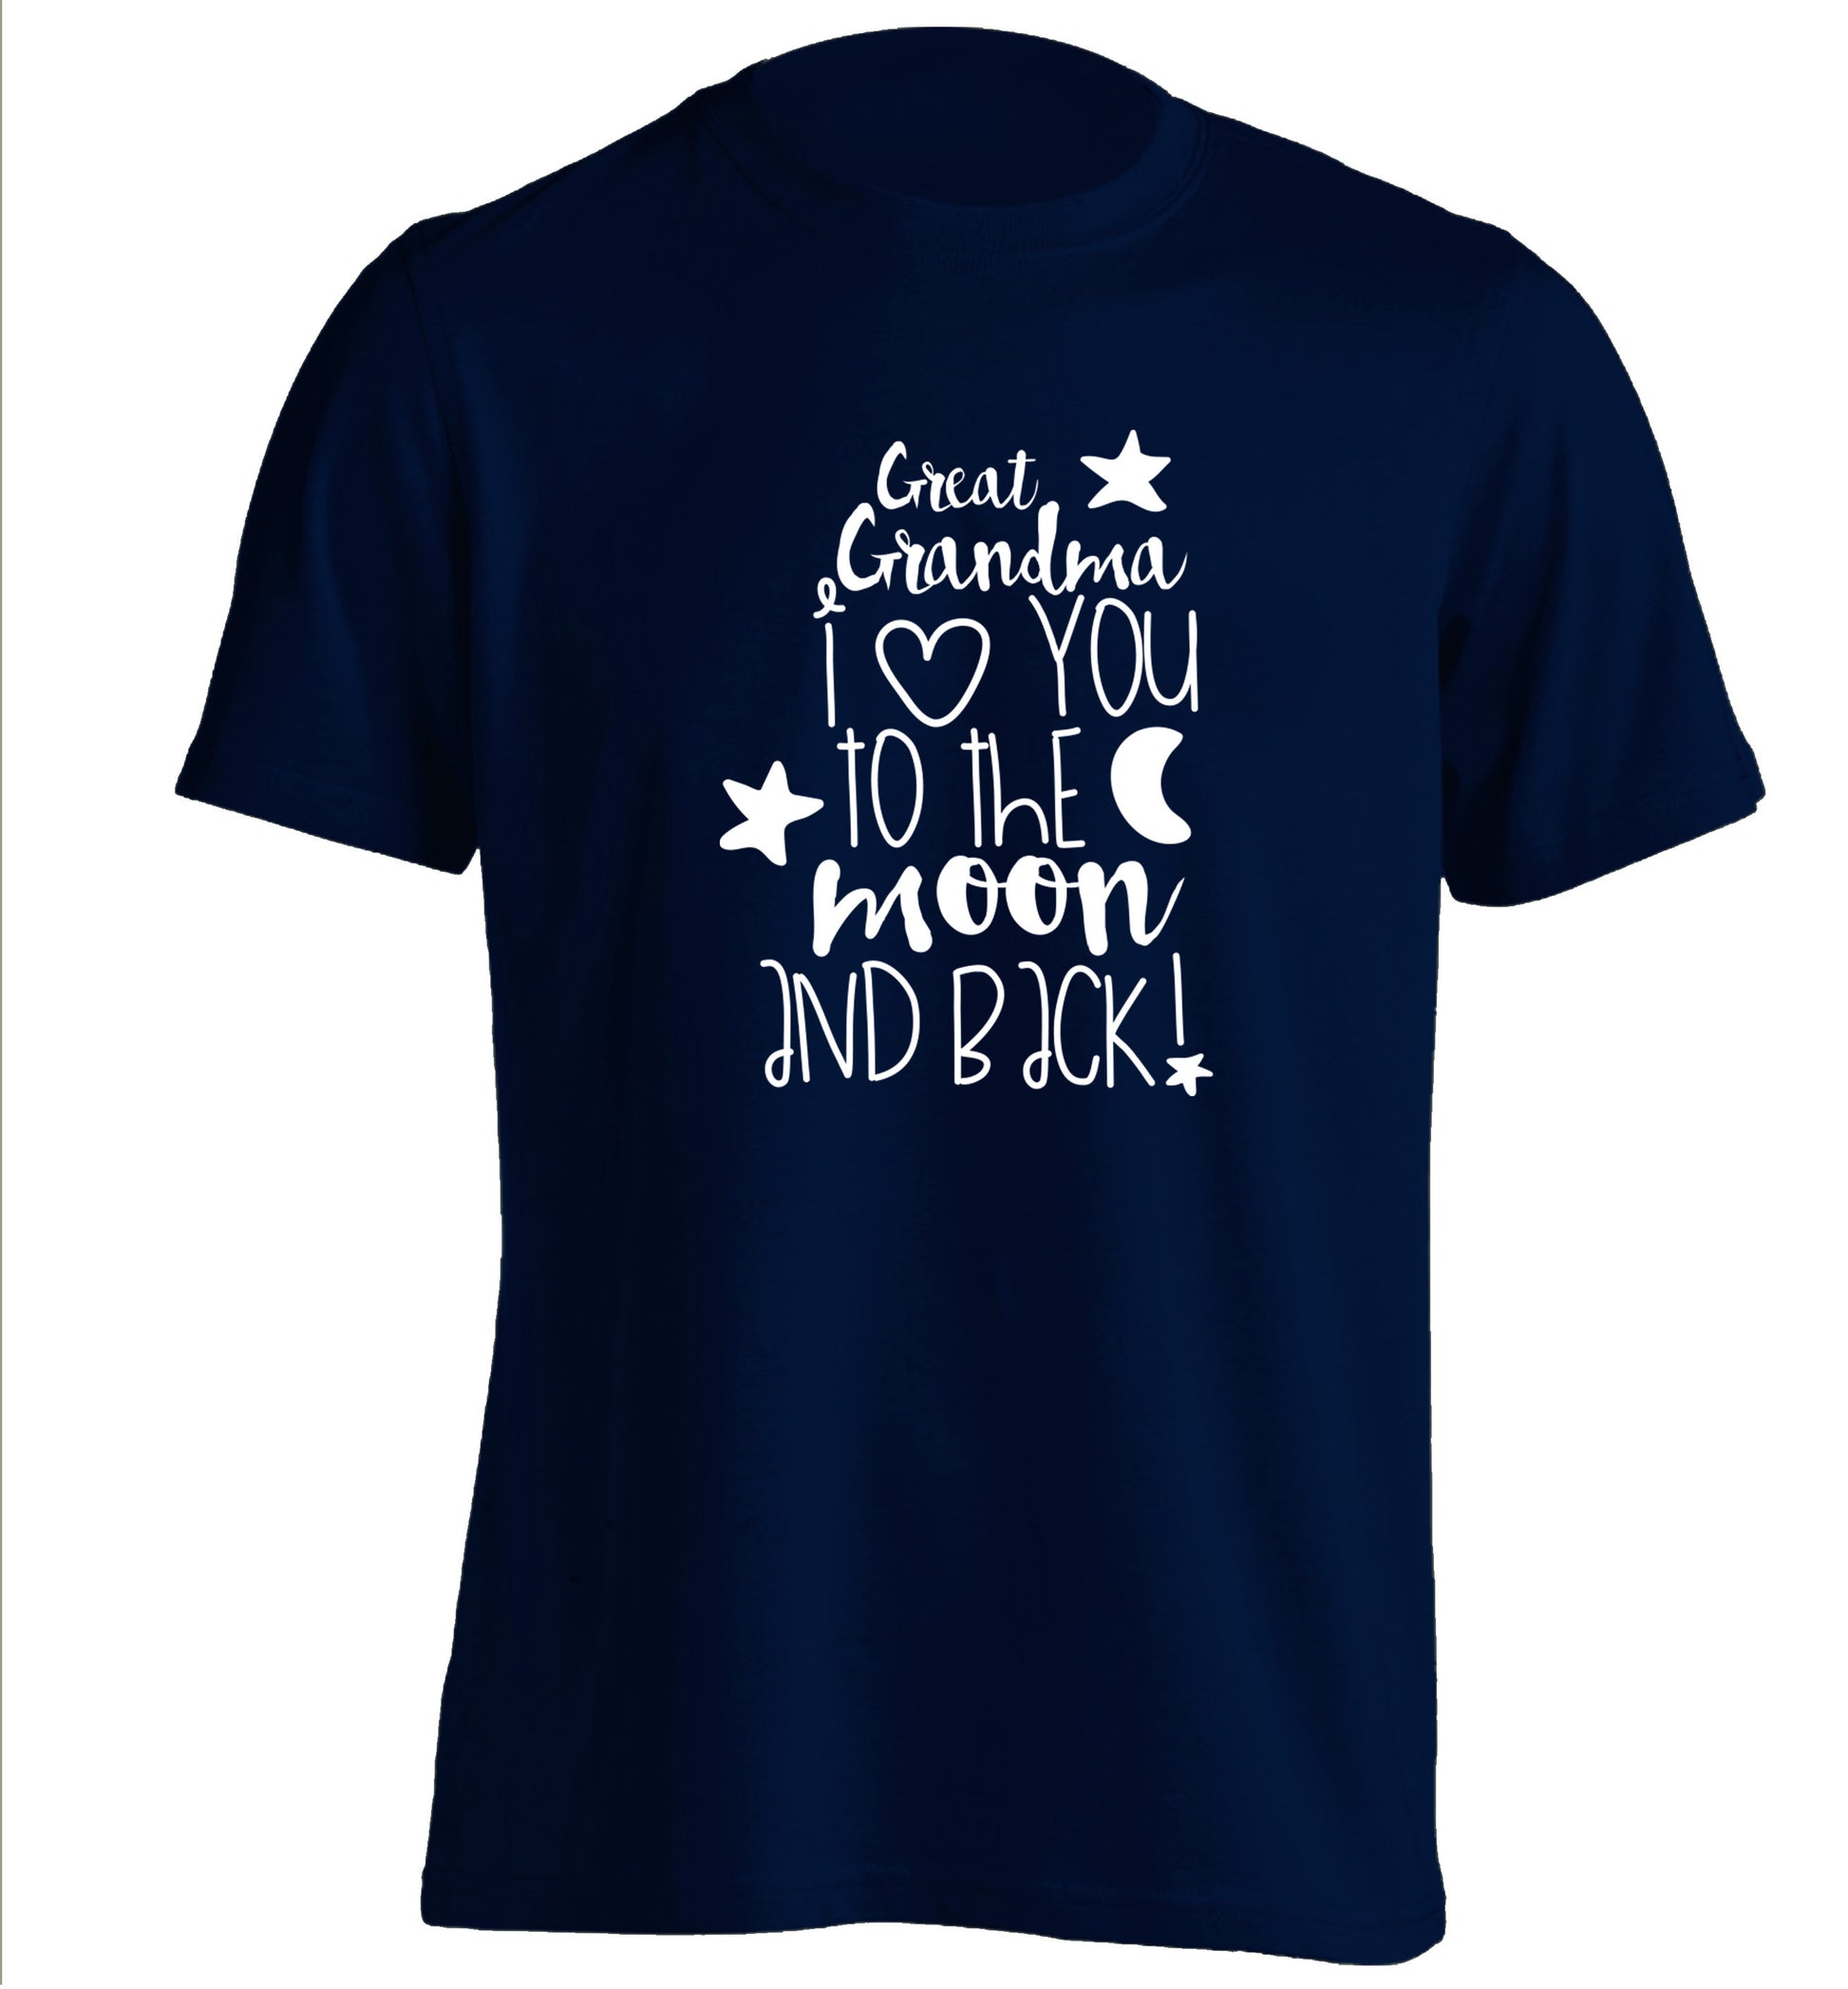 Great Grandma I love you to the moon and back adults unisex navy Tshirt 2XL